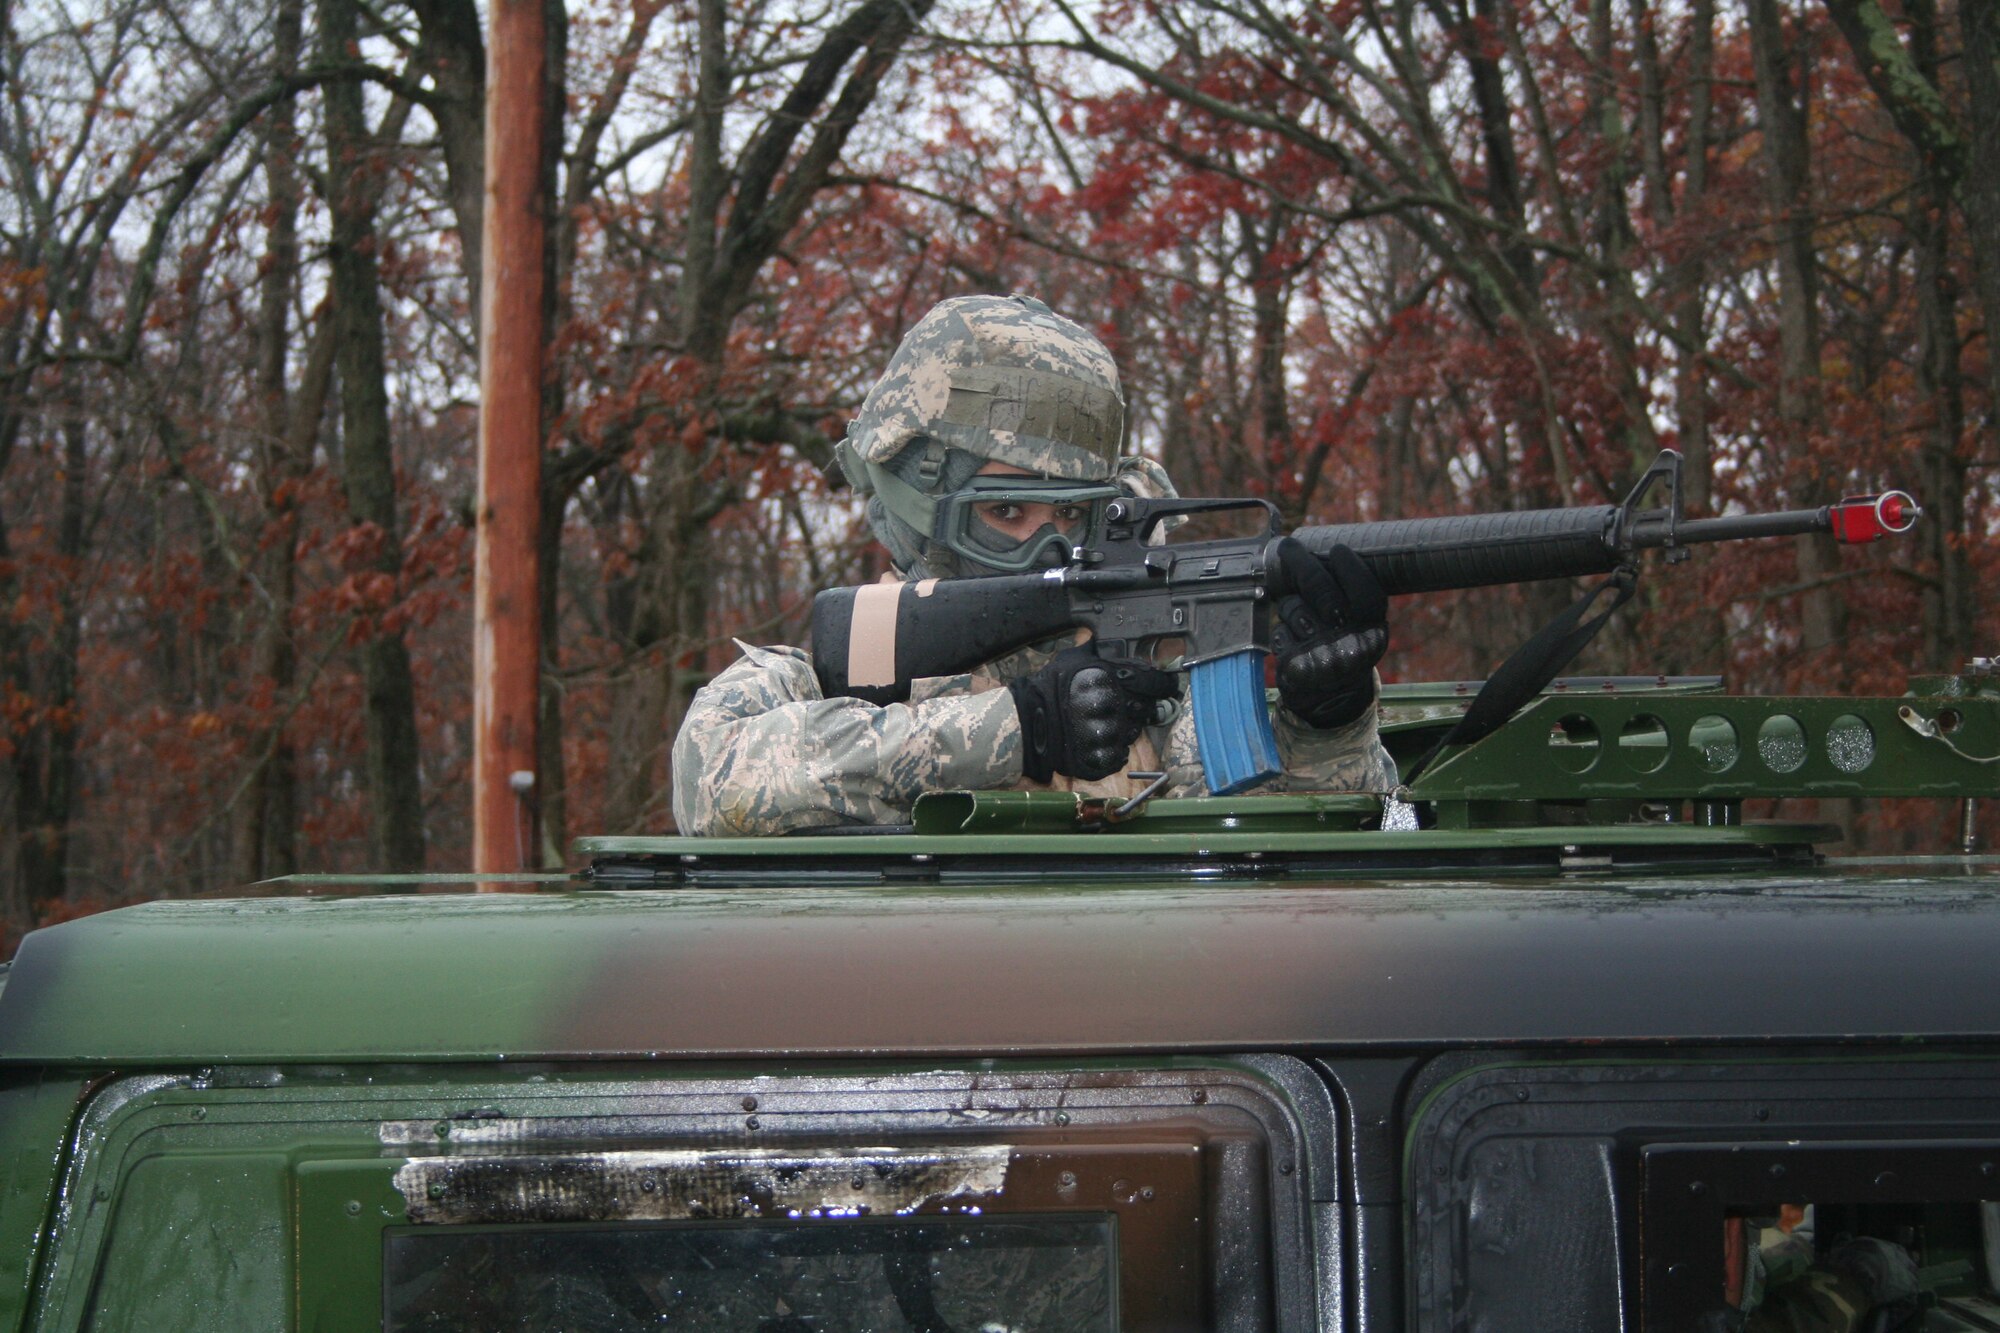 A student in the Combat Airman Skills Training Course 10-1A move out for mounted patrol, or convoy operations, training during a course session on Nov. 12, 2009, on a range at Joint Base McGuire-Dix-Lakehurst, N.J.  The course, taught by the U.S. Air Force Expeditionary Center's 421st Combat Training Squadron, prepares Airmen for upcoming deployments.  (U.S. Air Force Photo/Tech. Sgt. Scott T. Sturkol)